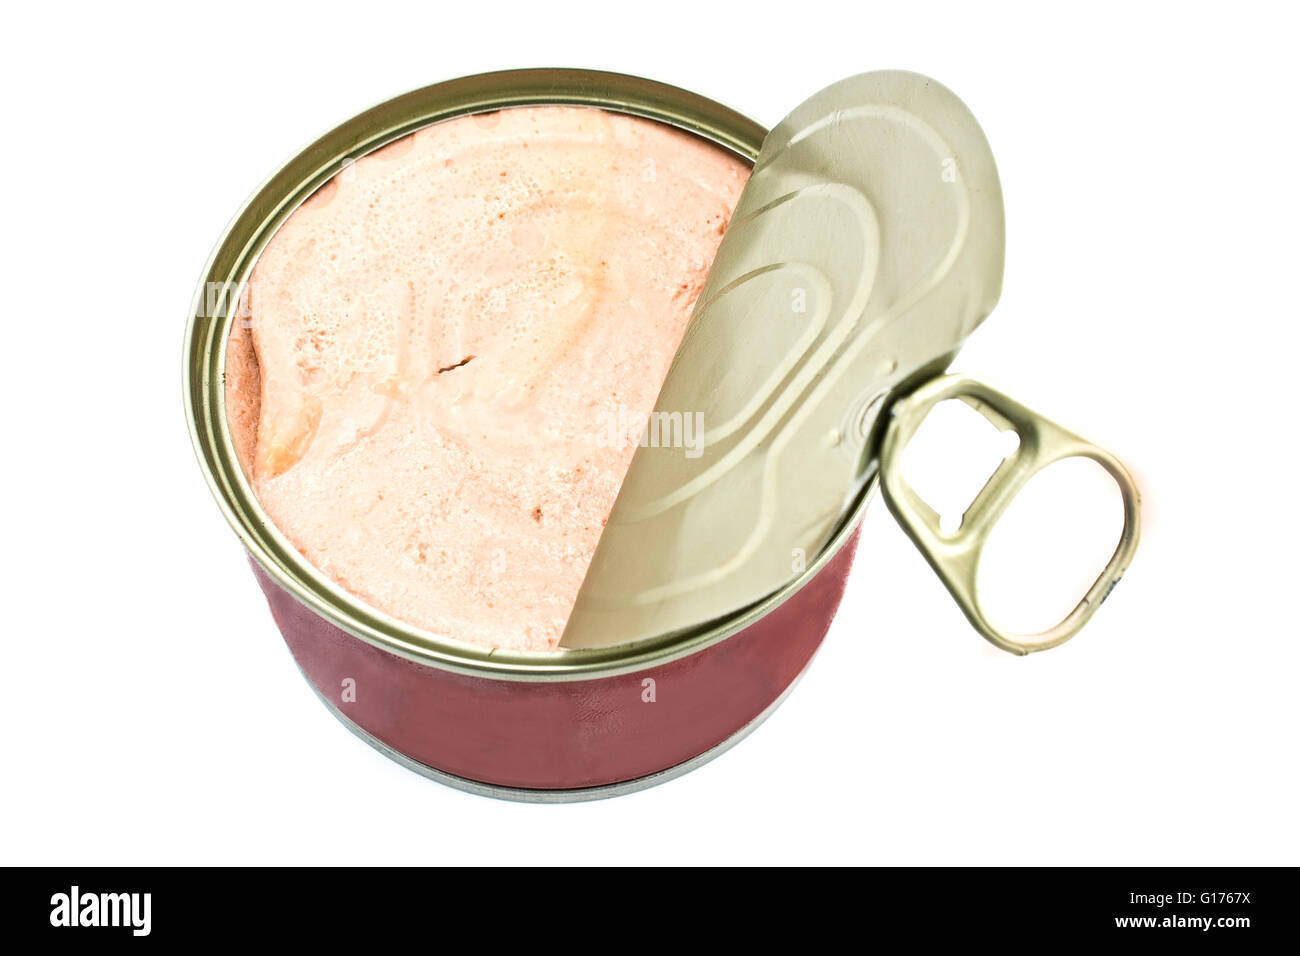 Canned pate isolated on white Stock Photo